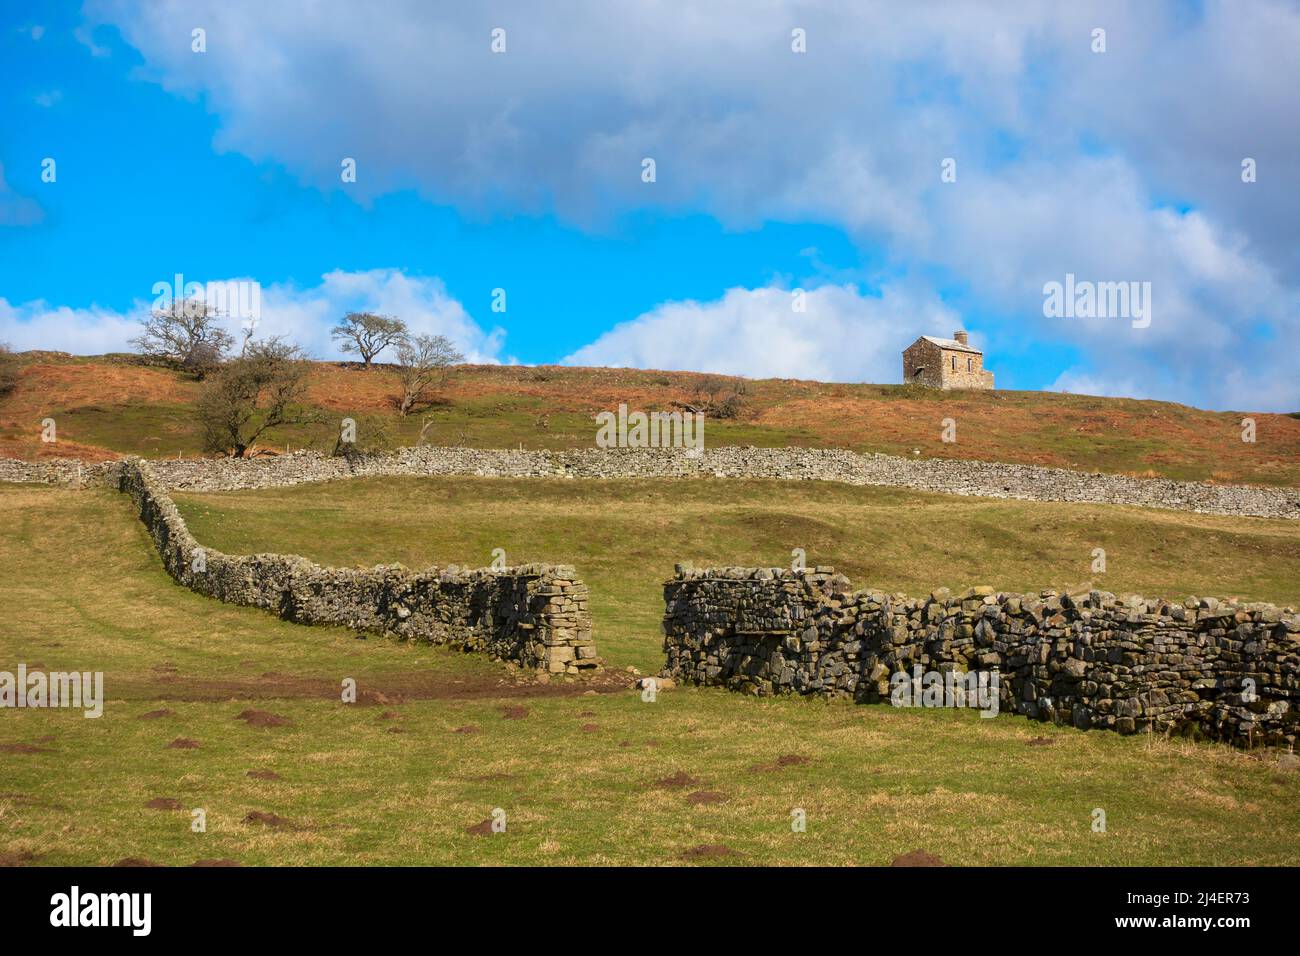 Hilltop house near Bolton Castle, Wensleydale, Yorkshire Dales National Park. Iconic dry stone walls enclose sheep pastures. Stock Photo